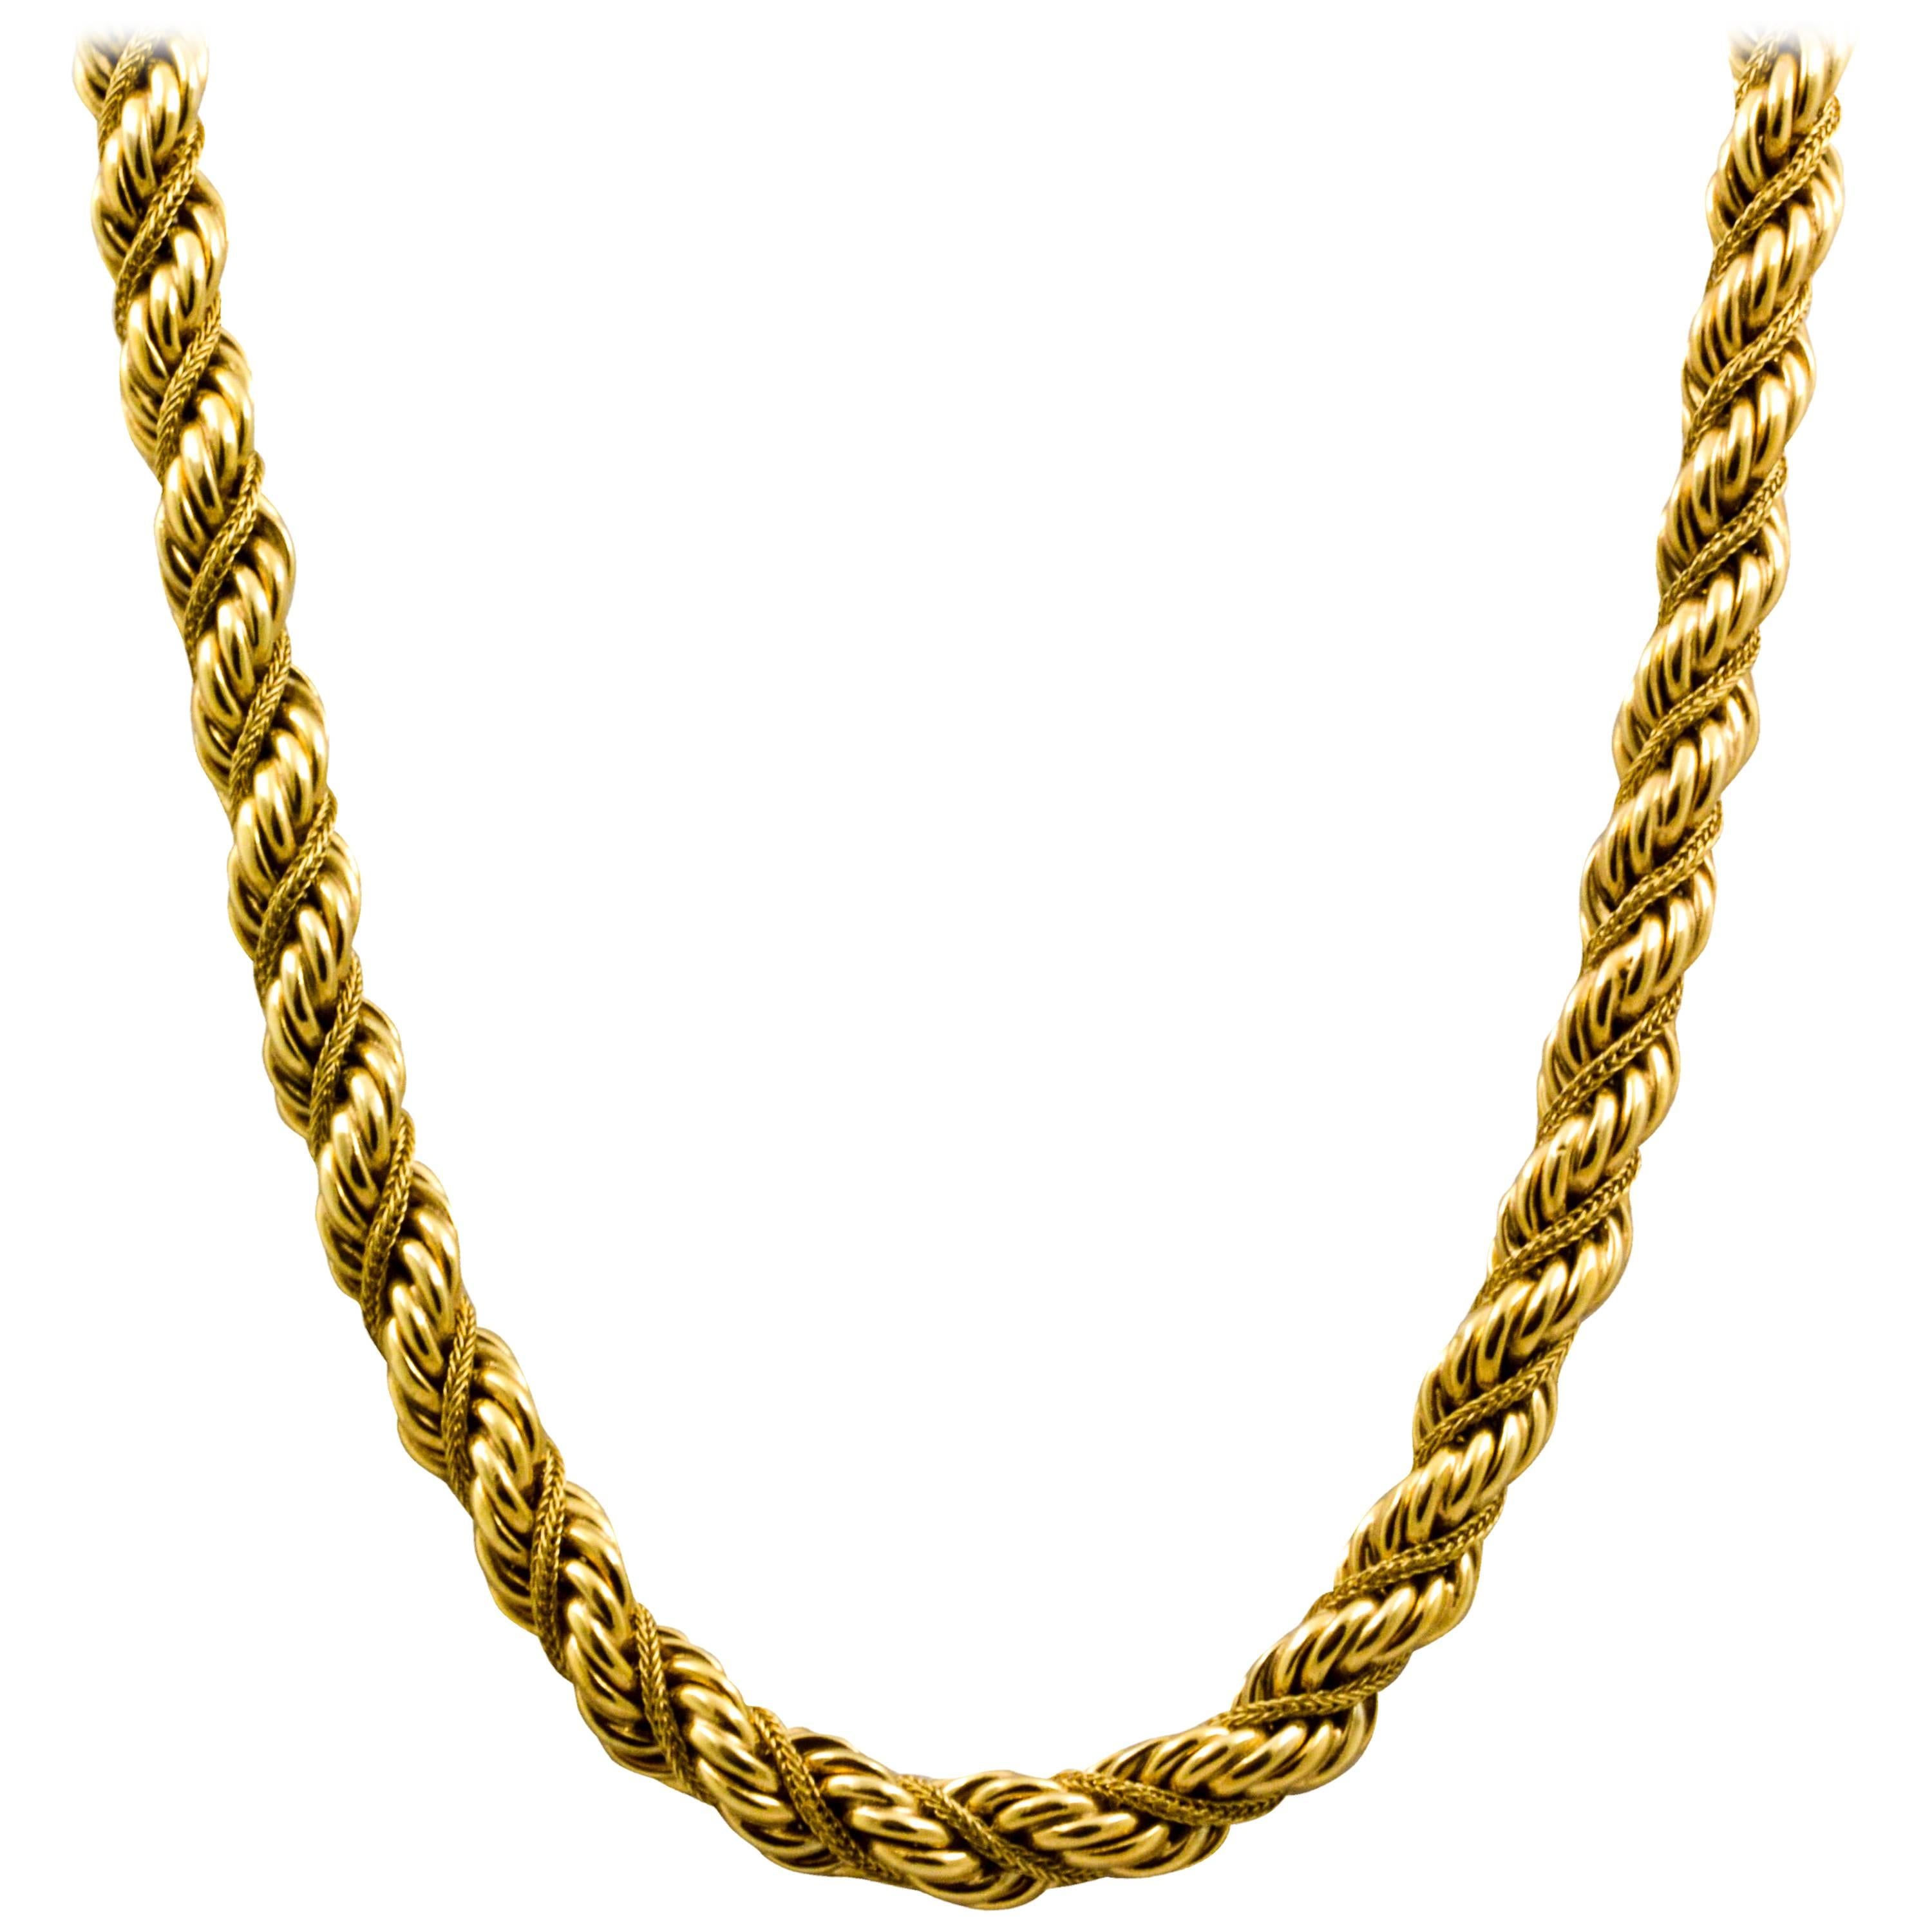 Gold Braided Rope Necklace